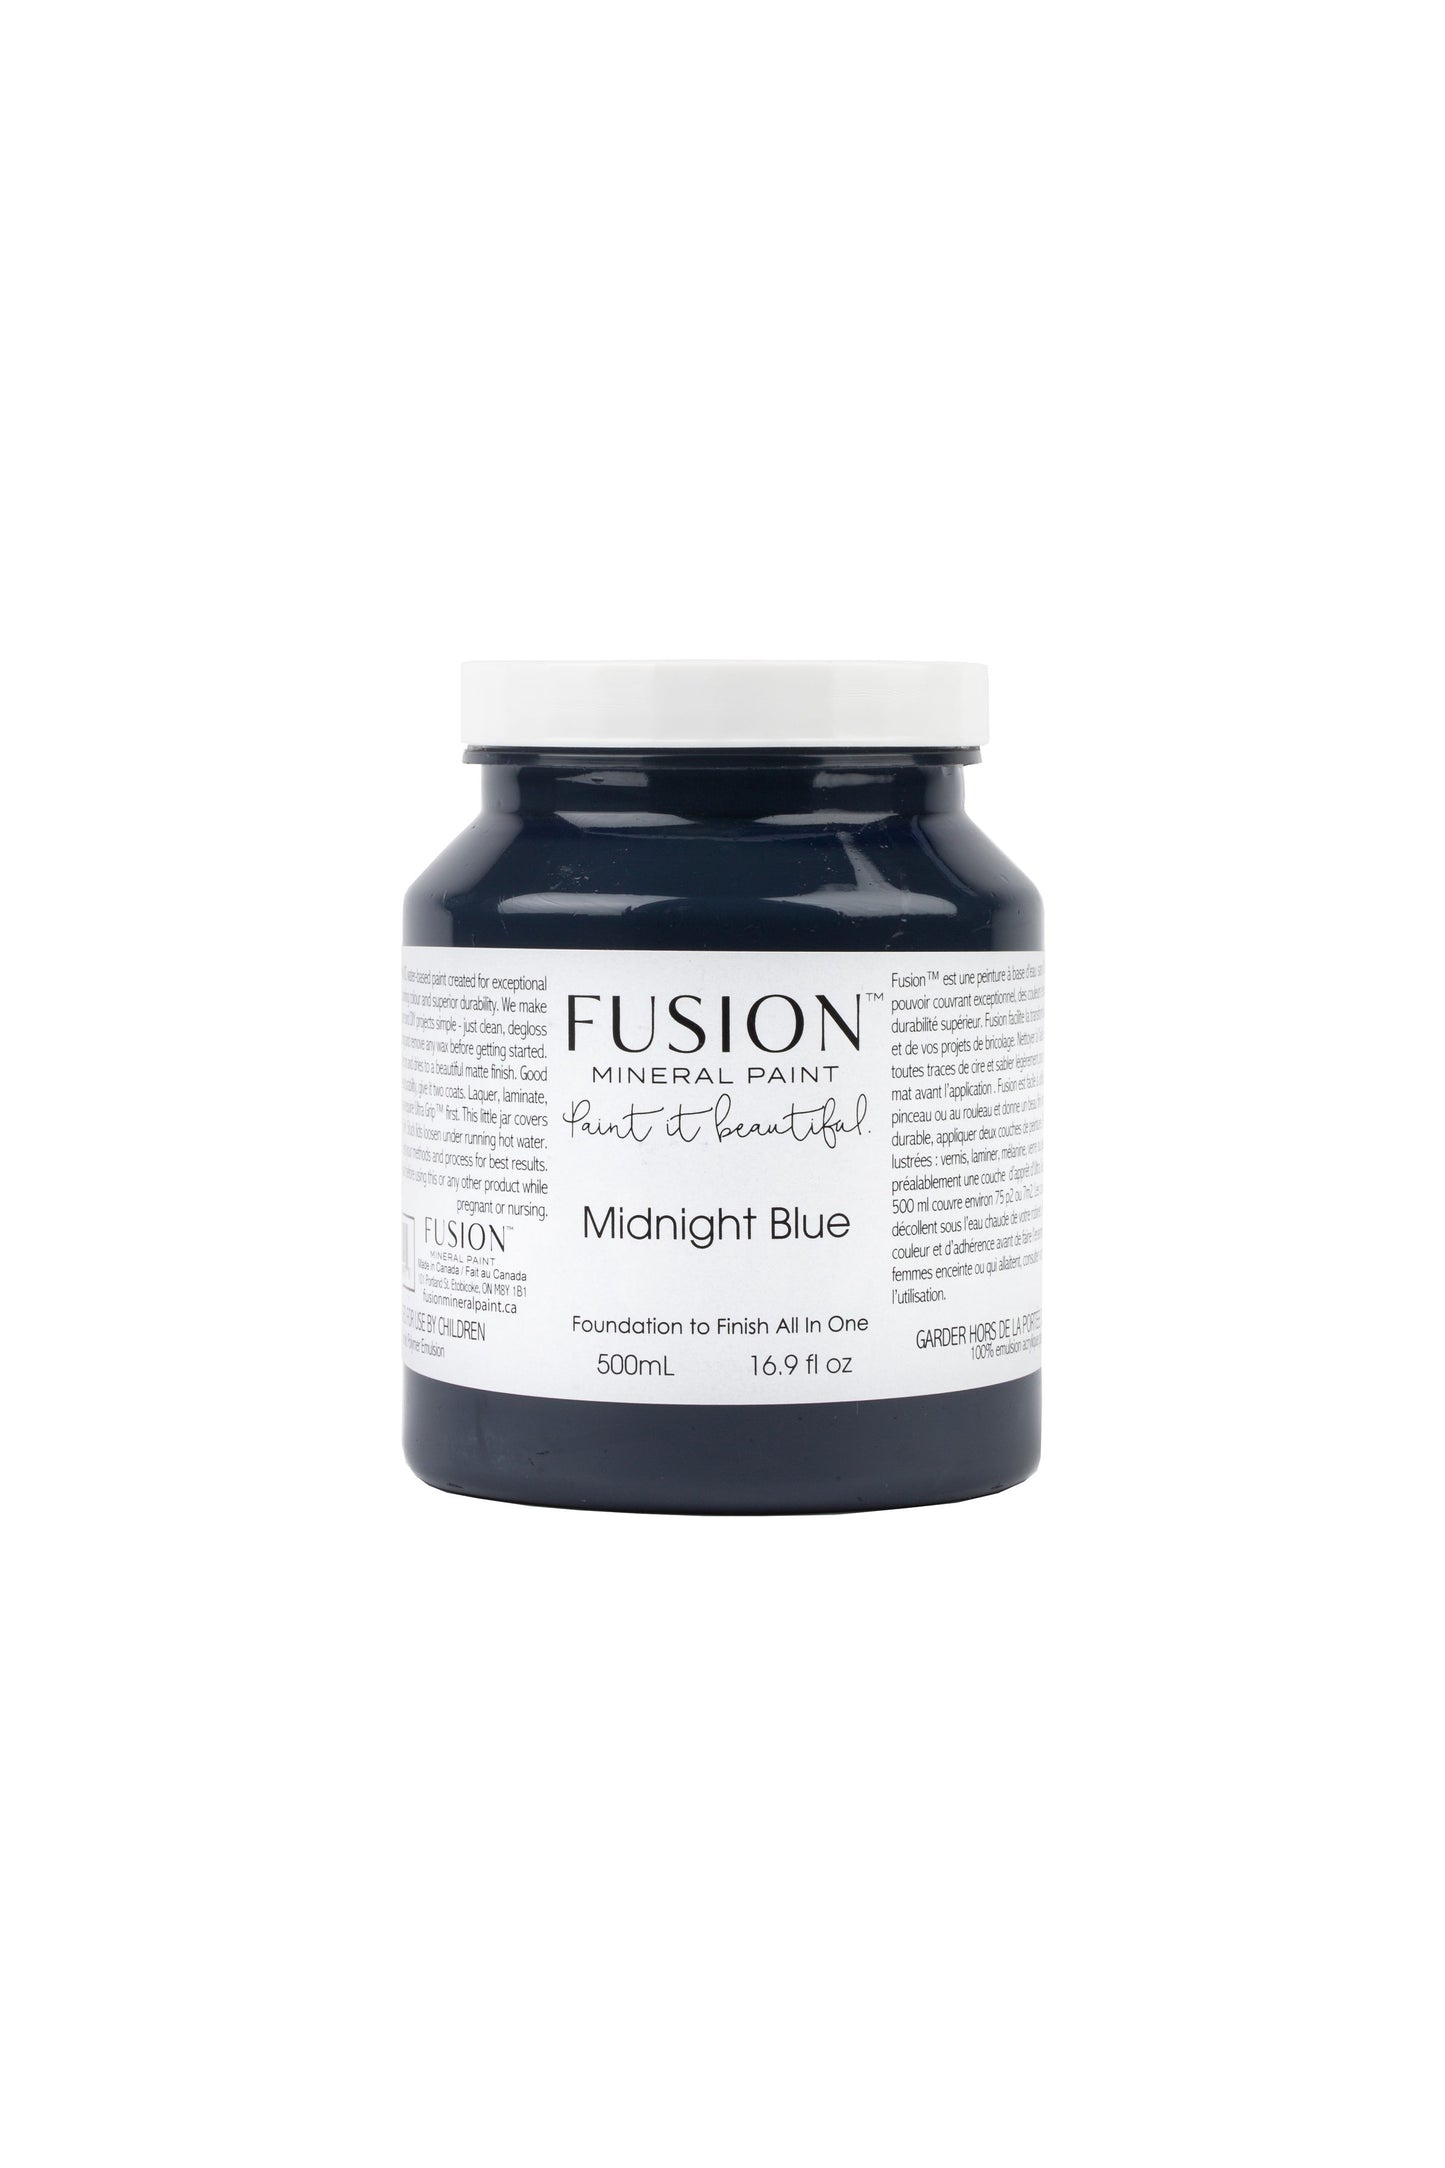 Midnight Blue Fusion Mineral Paint, Navy Blue Paint Color| 500ml Pint Size